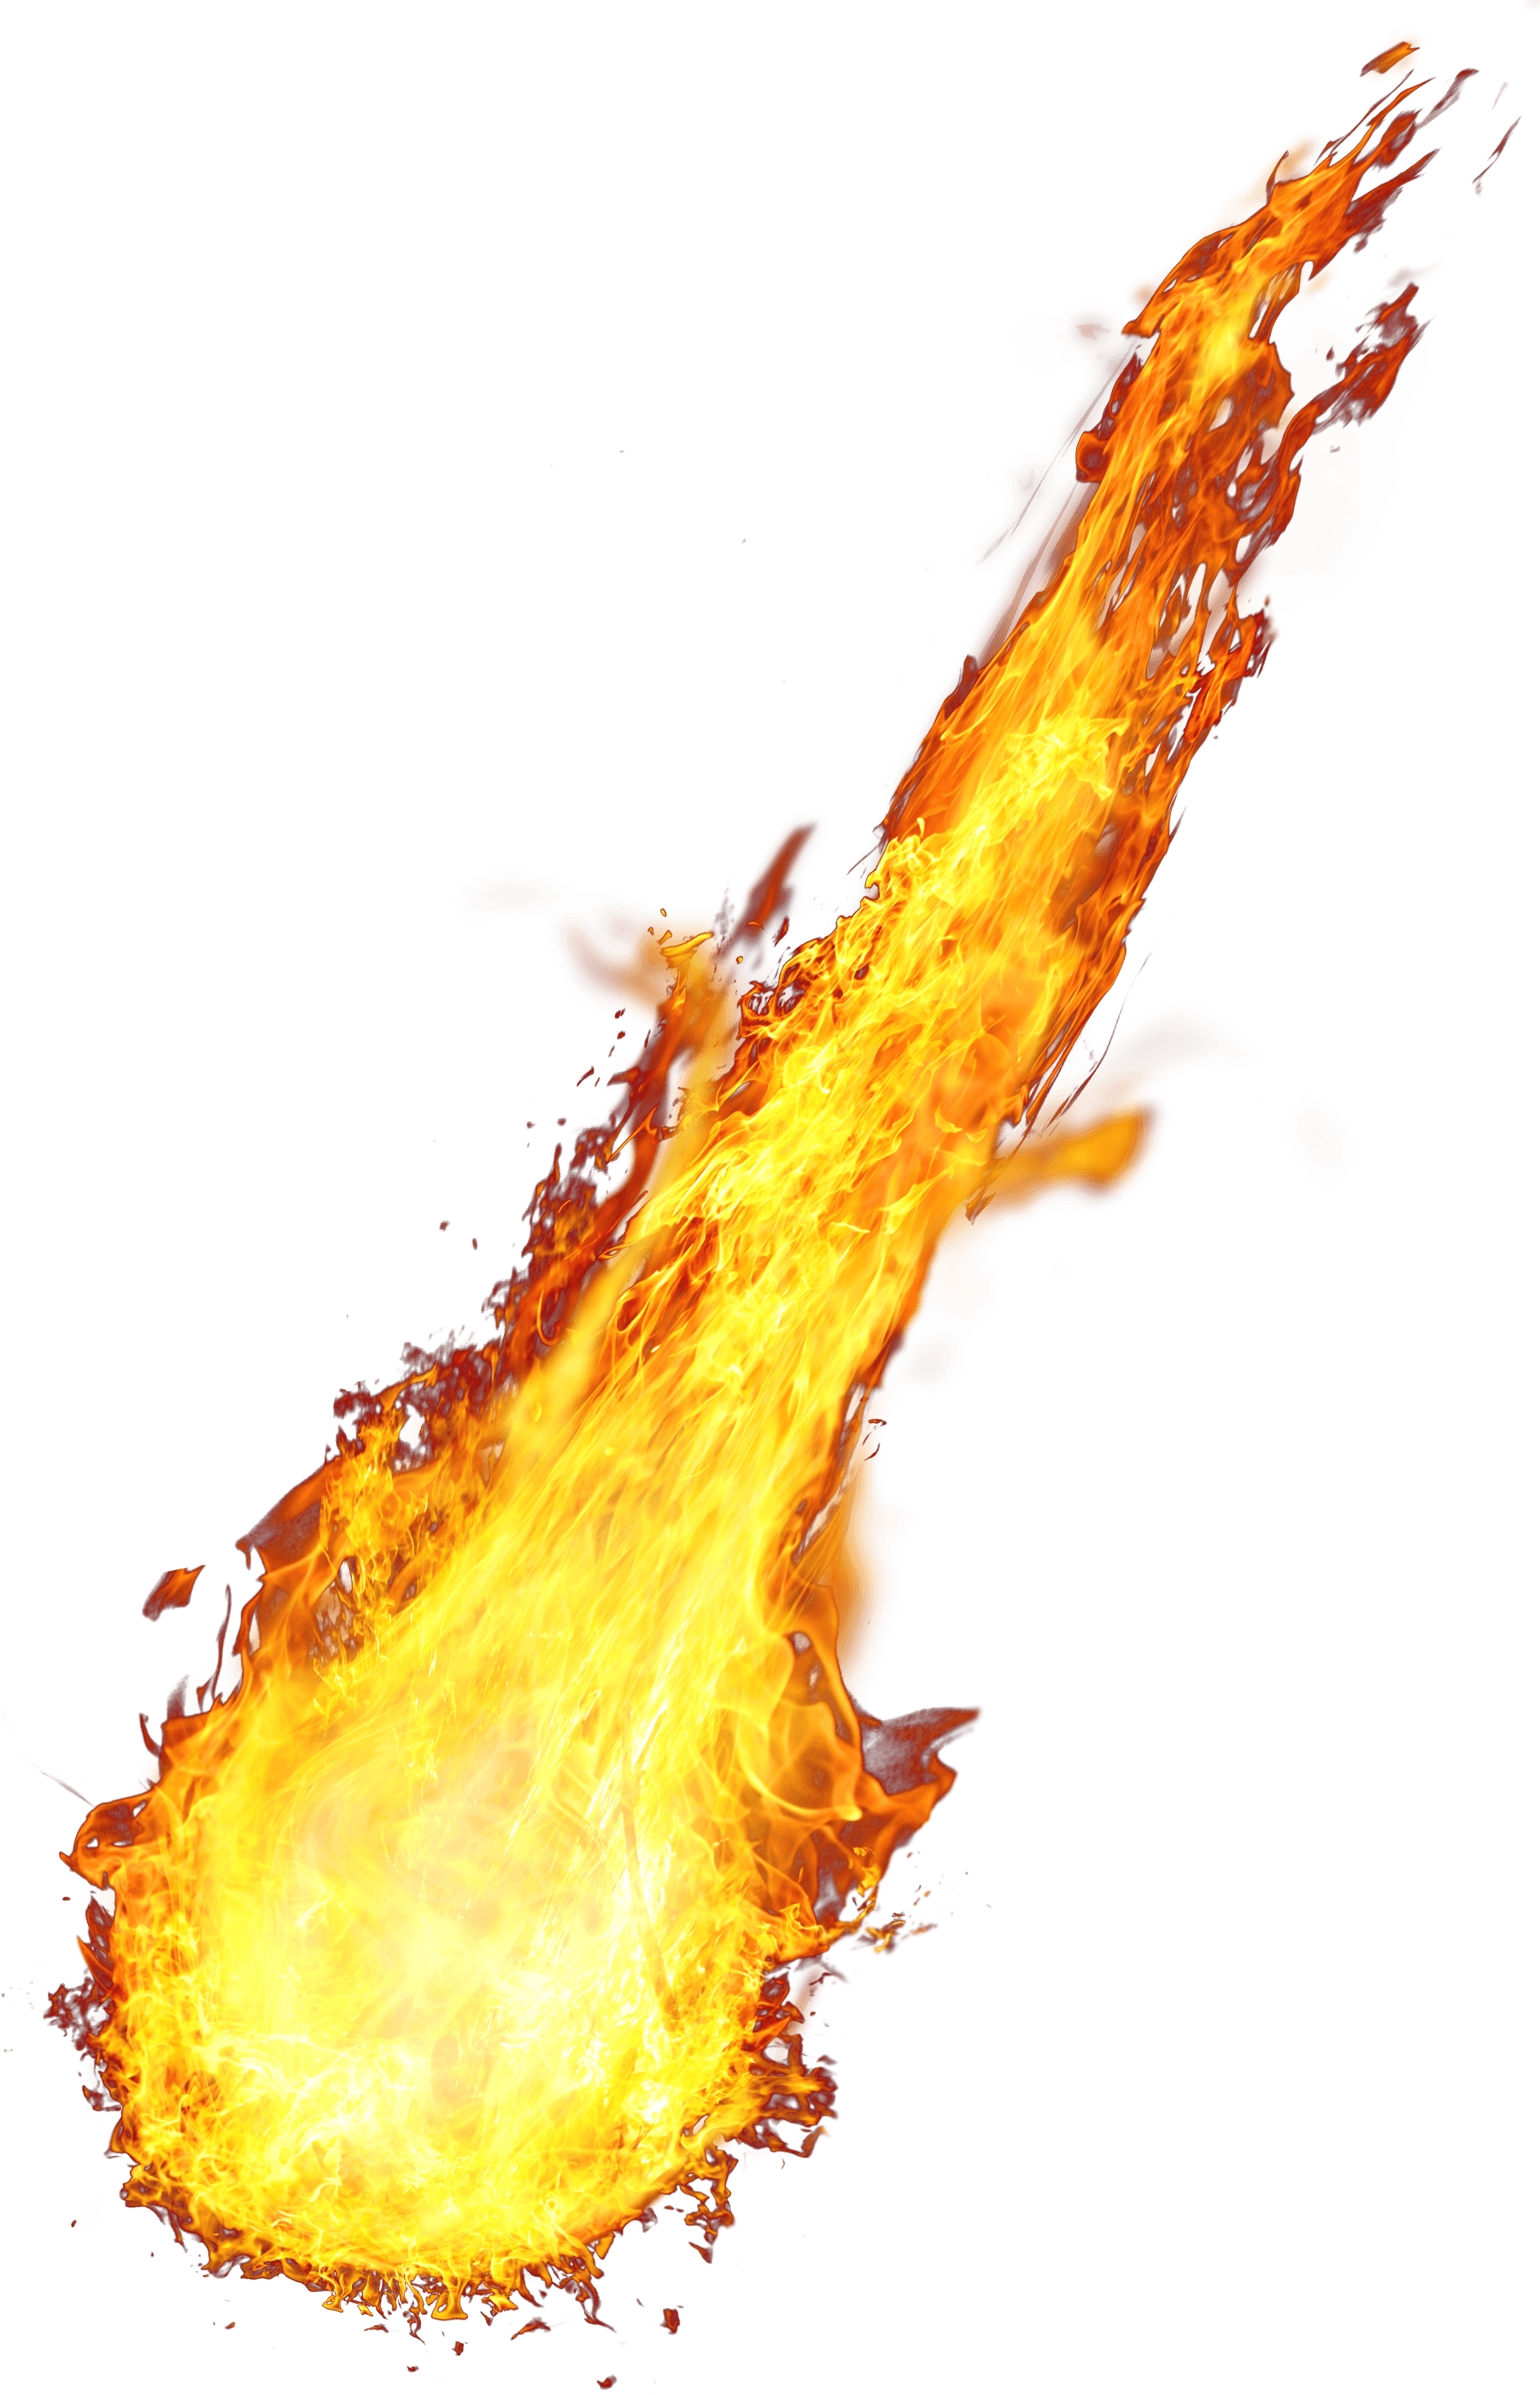 download fireball png image #38679